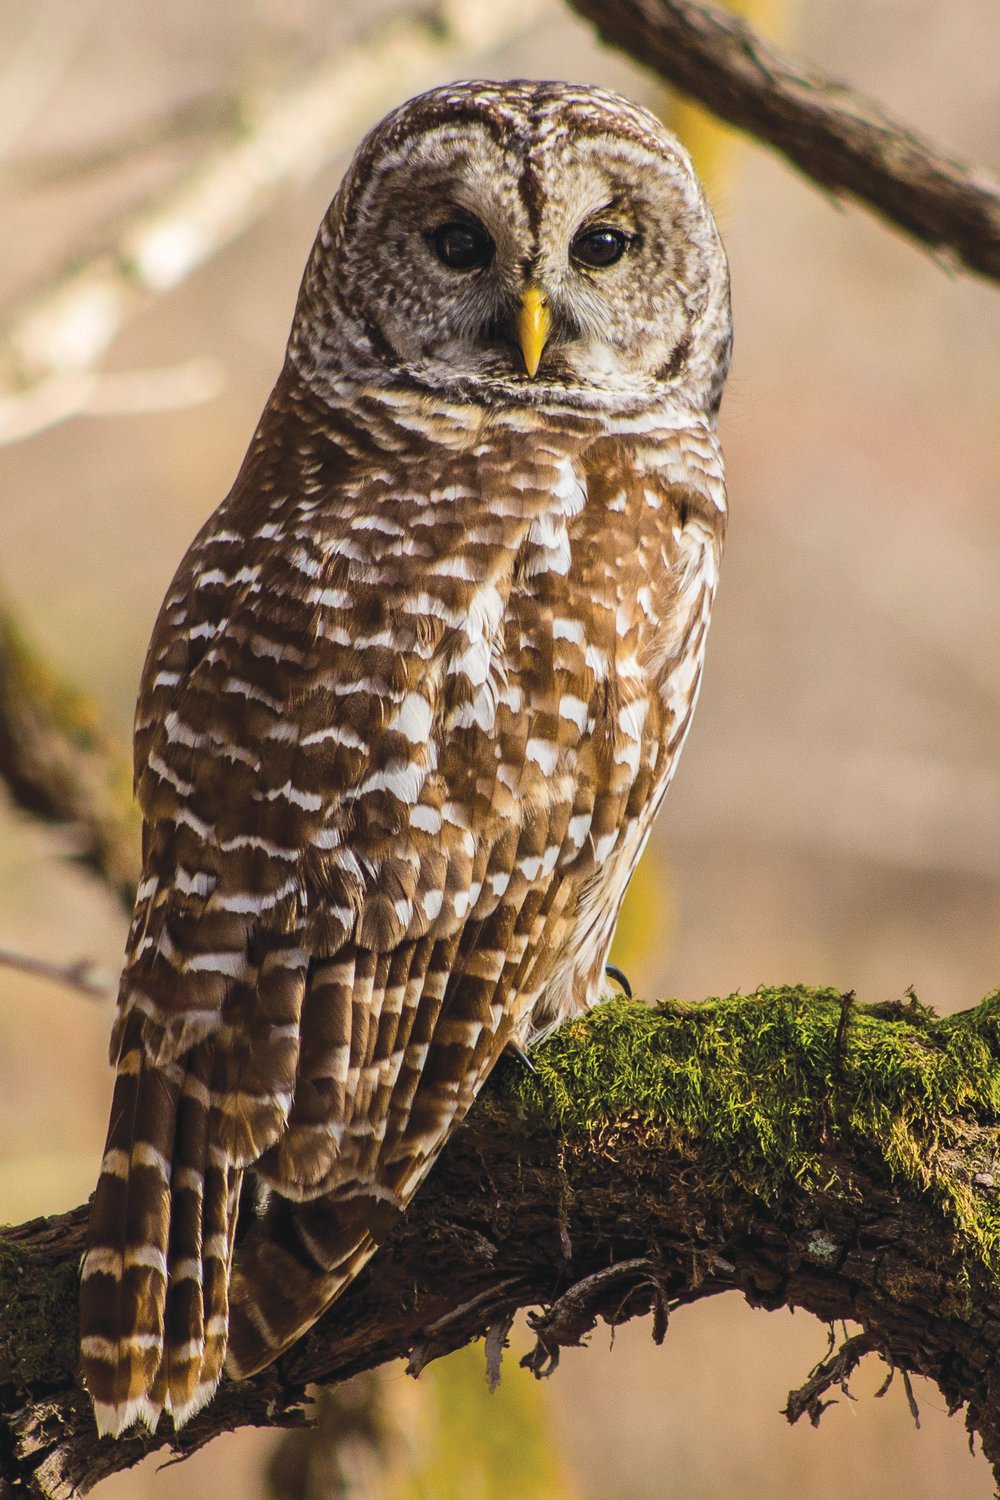 Brooke Harshbarger captured an image of this barred owl.